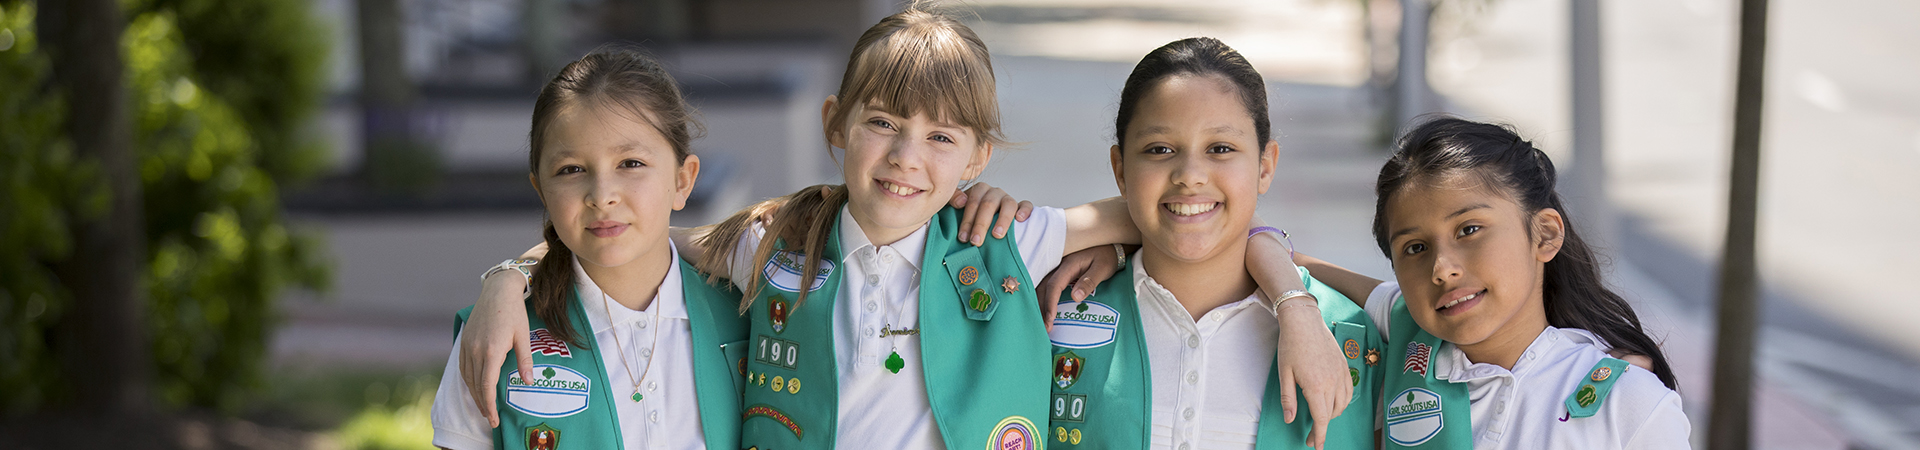  A group of Girl Scouts smiling with their arms around each other 